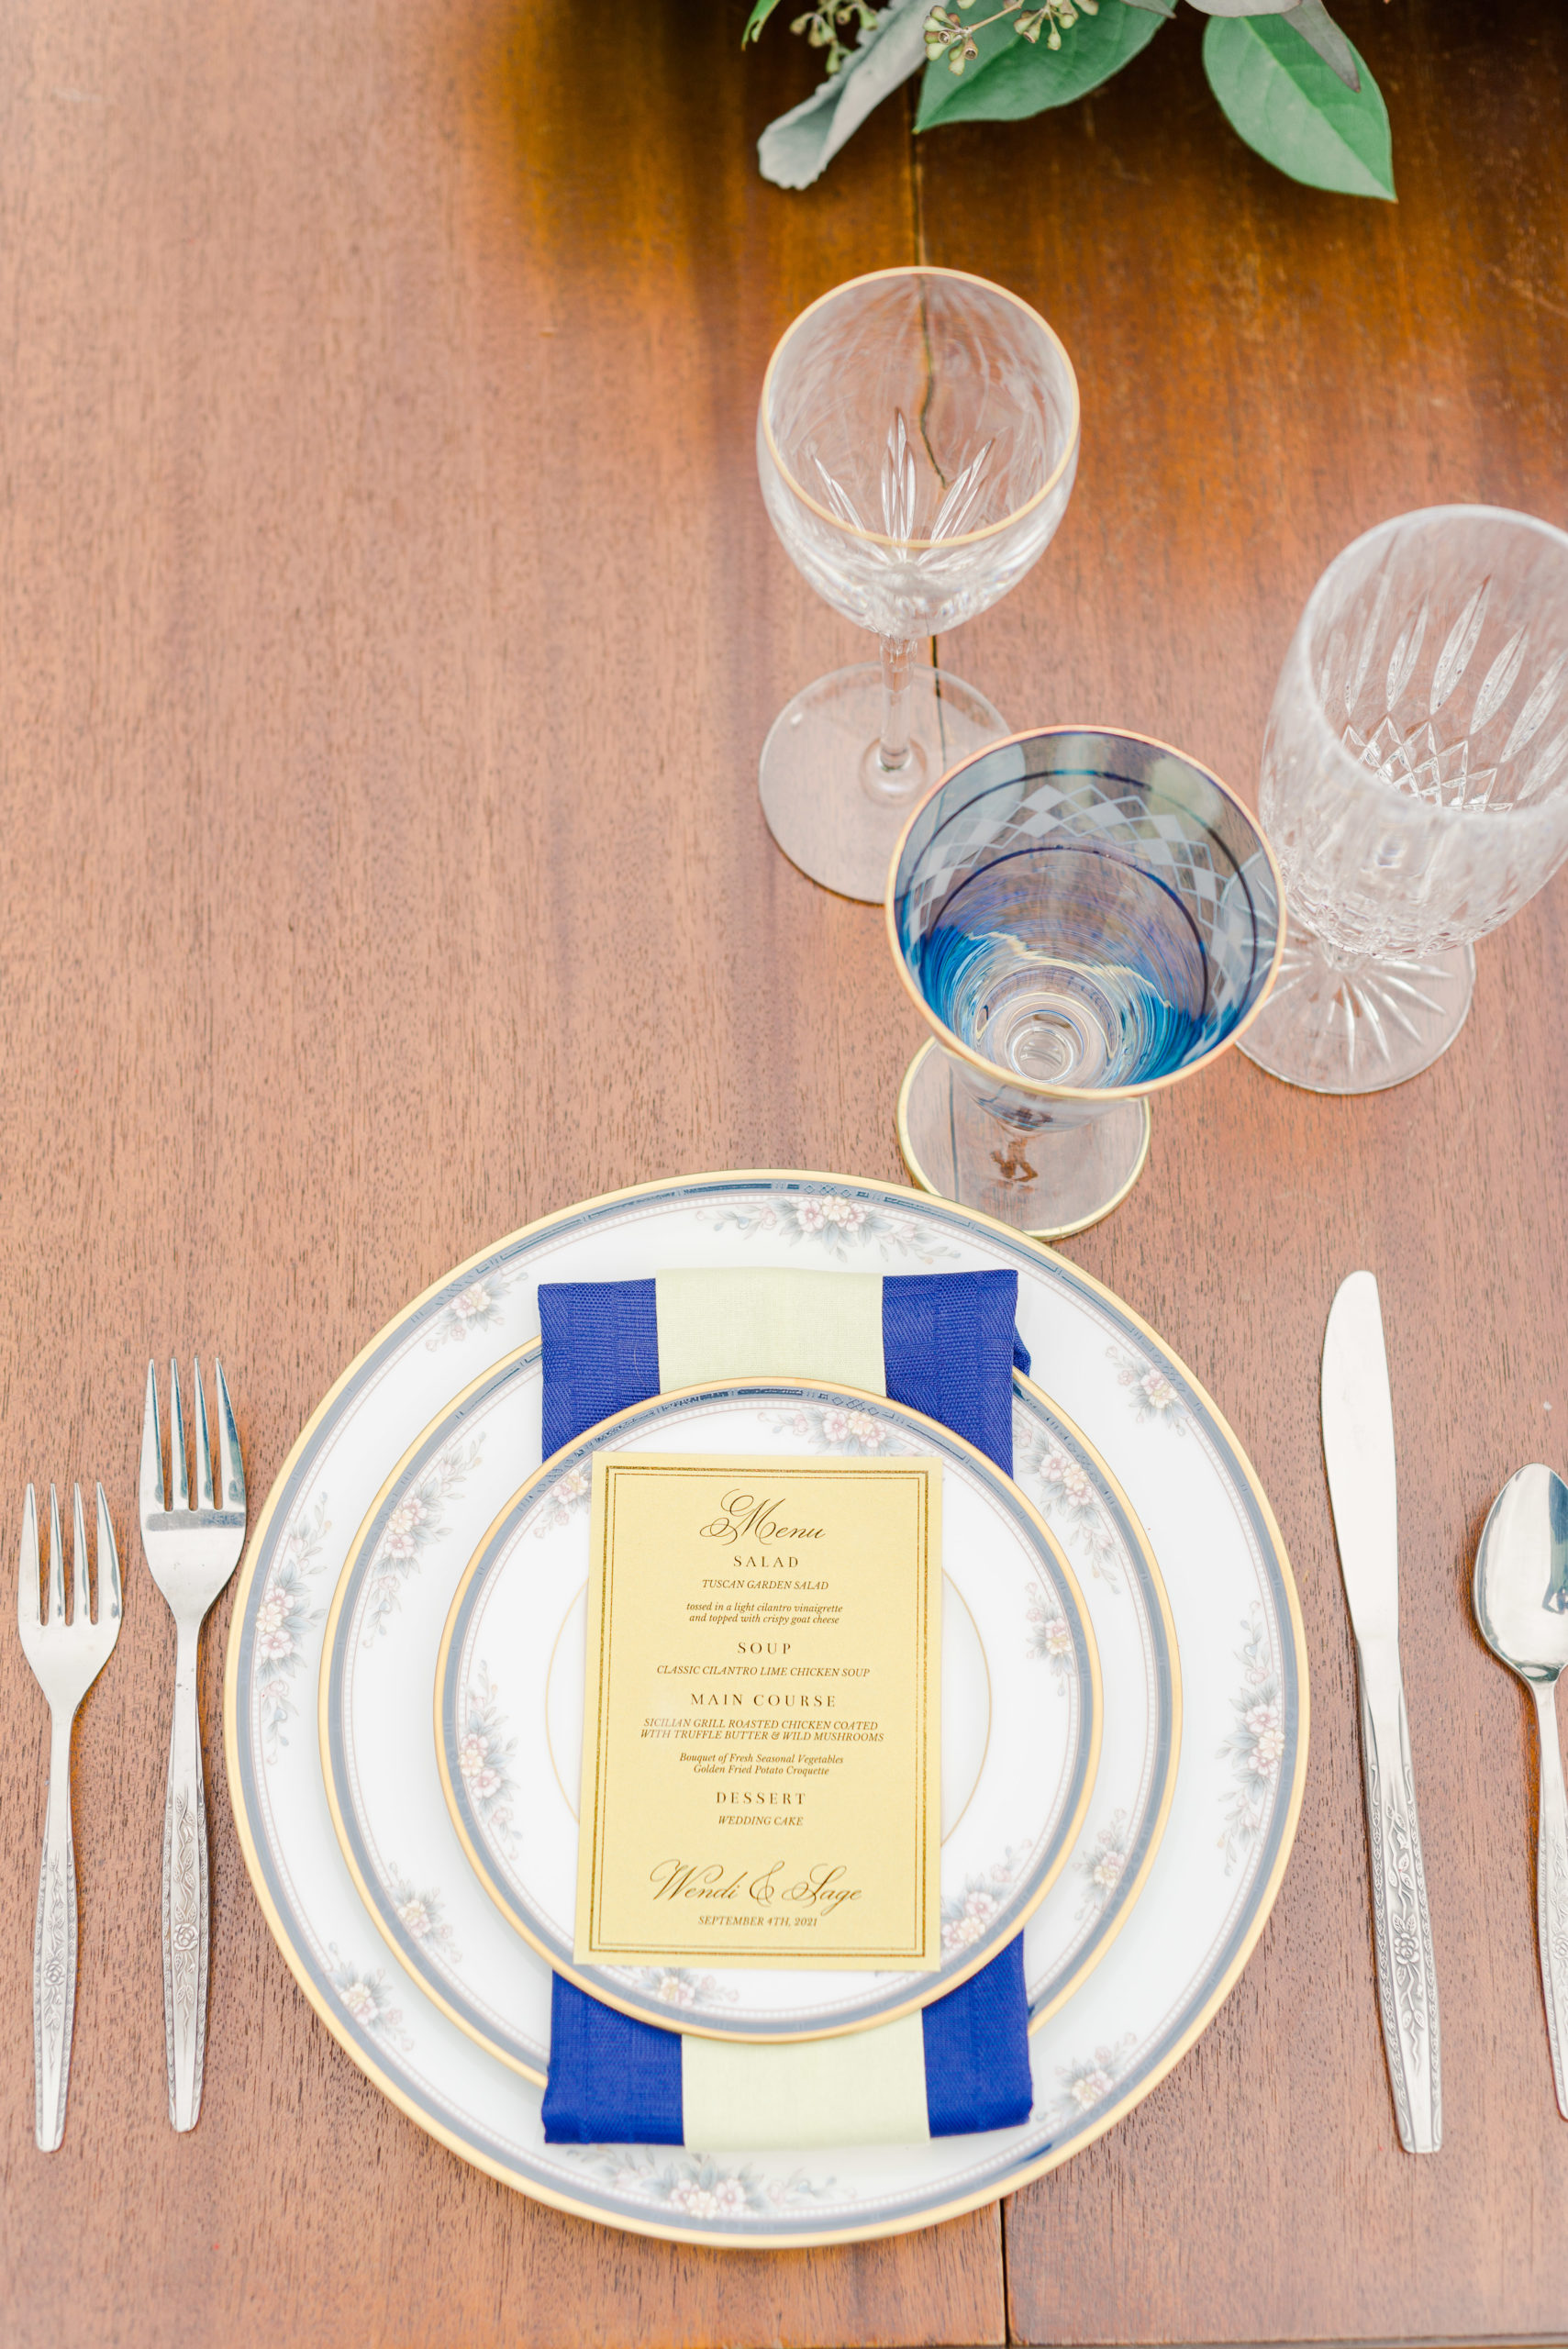 blue and yellow themed place setting for wedding reception